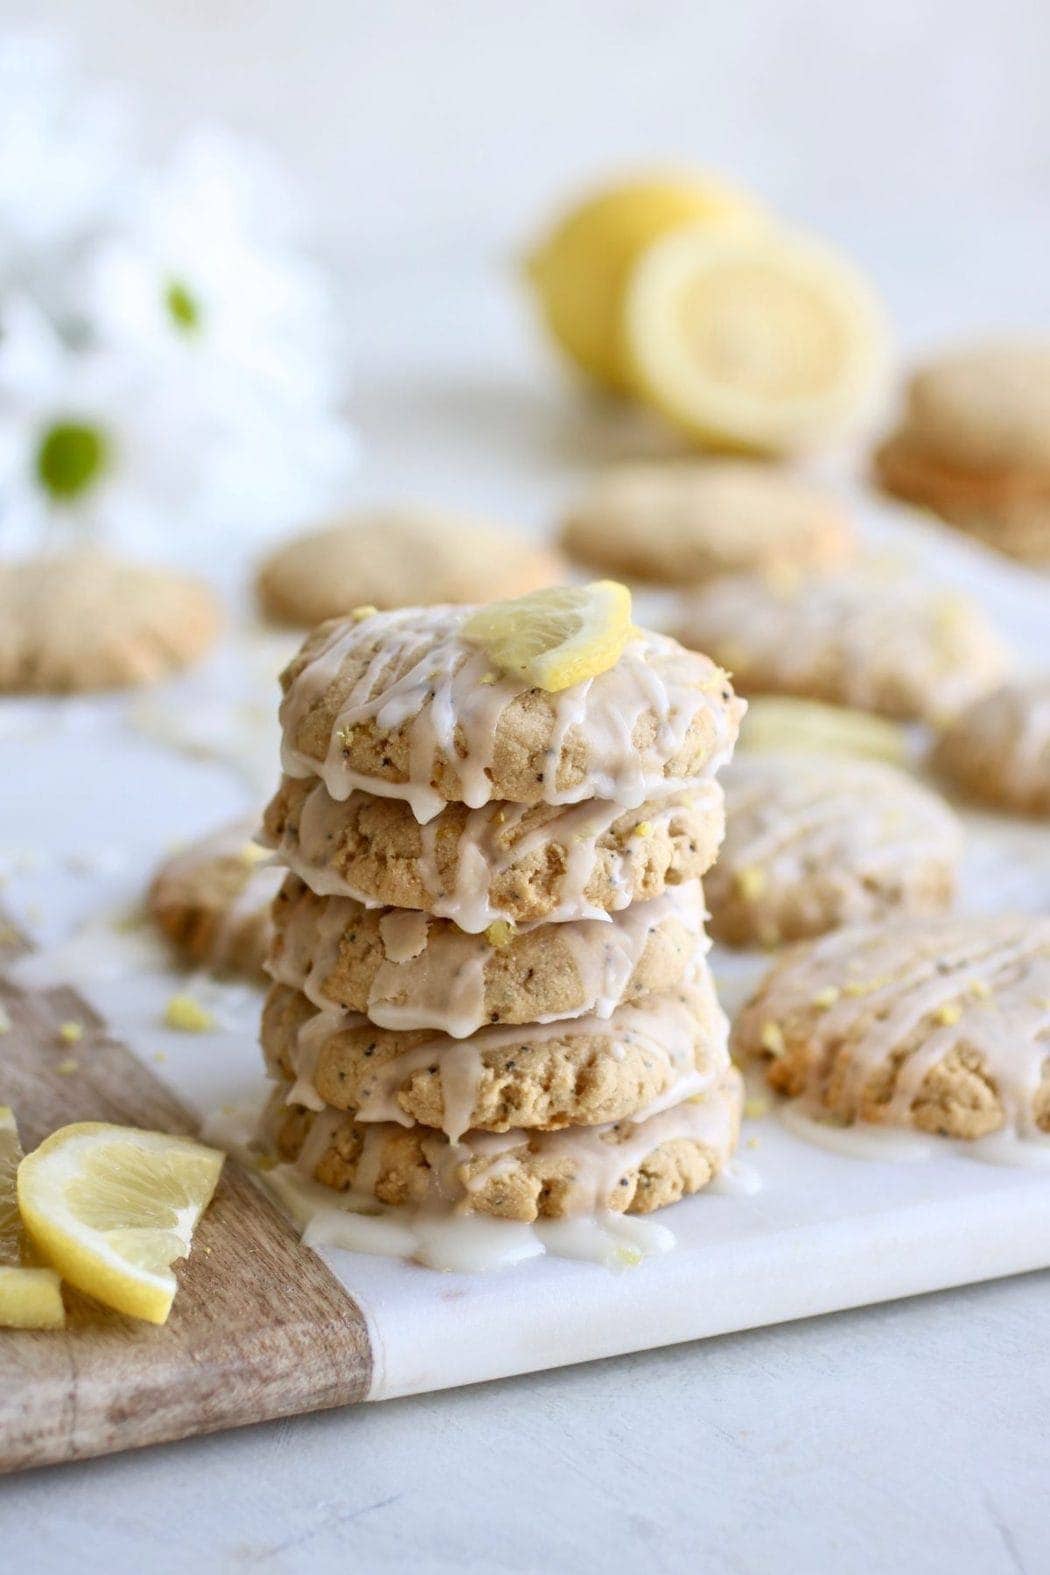 Photo of a stack of five Paleo Lemon Poppy Seed Cookies drizzled with a glaze.